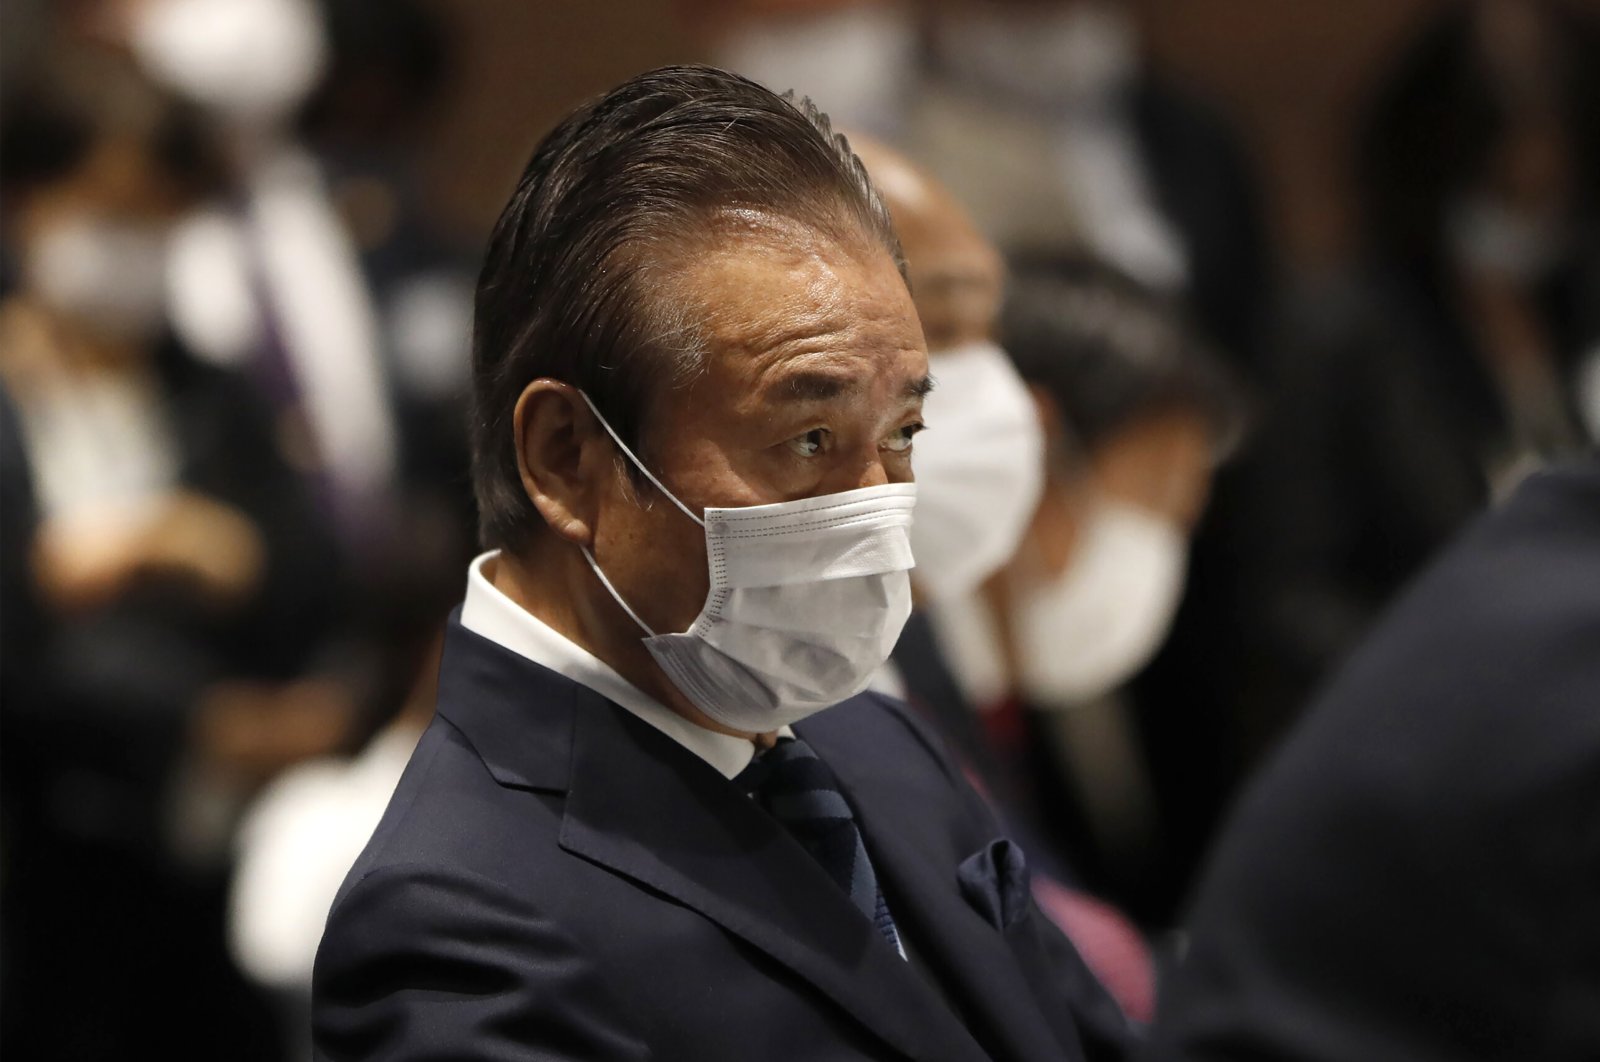 Haruyuki Takahashi, executive board member of the Tokyo Olympics Organizing Committee, attends a meeting, Tokyo, Japan, March 30, 2020. (AP Photo)